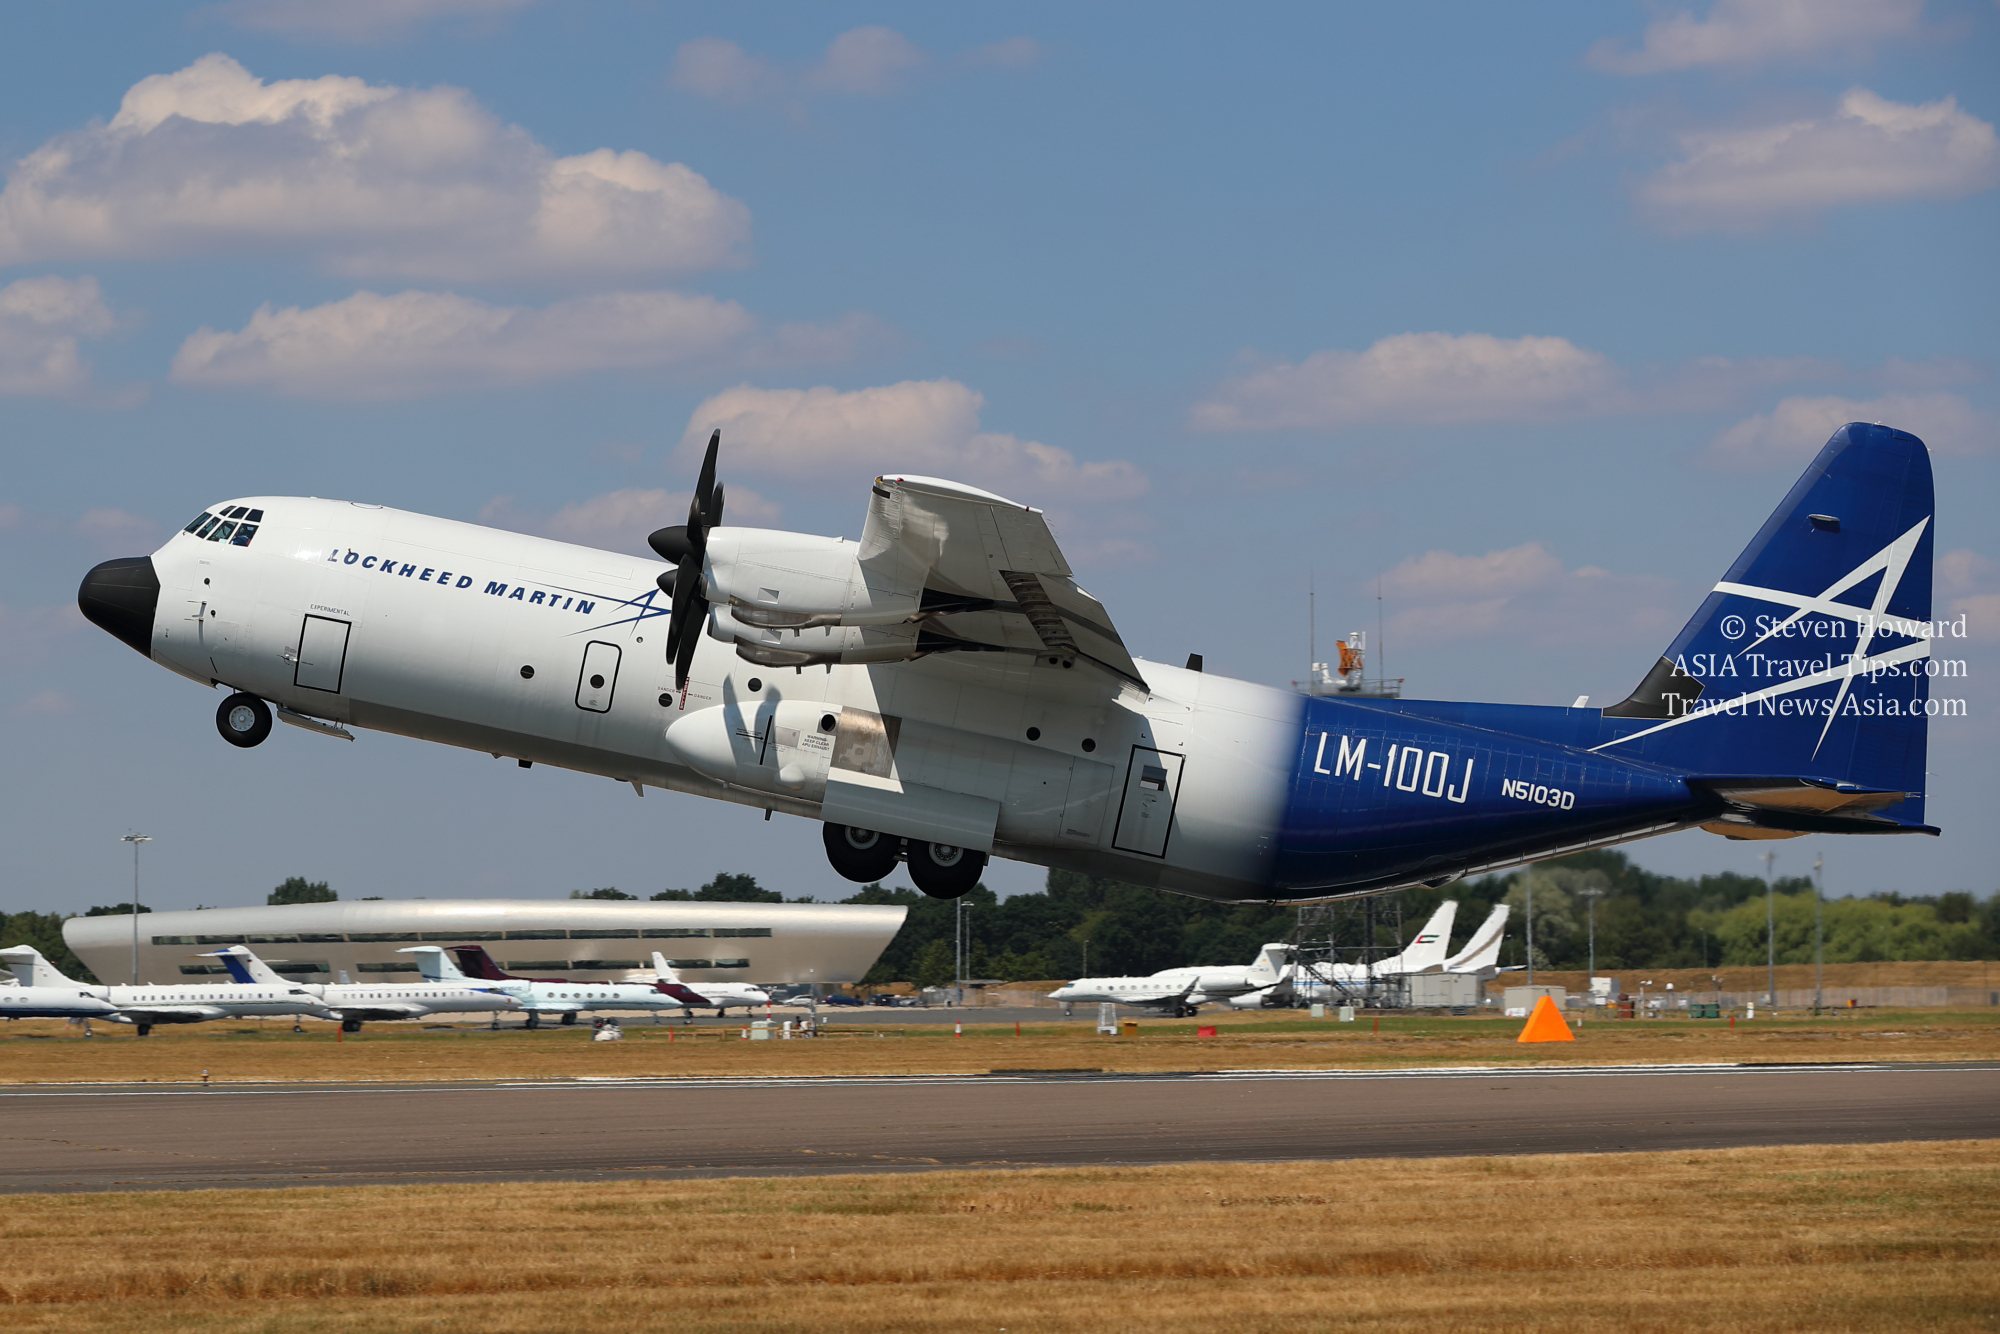 Pictures from Farnborough International Airshow 2018